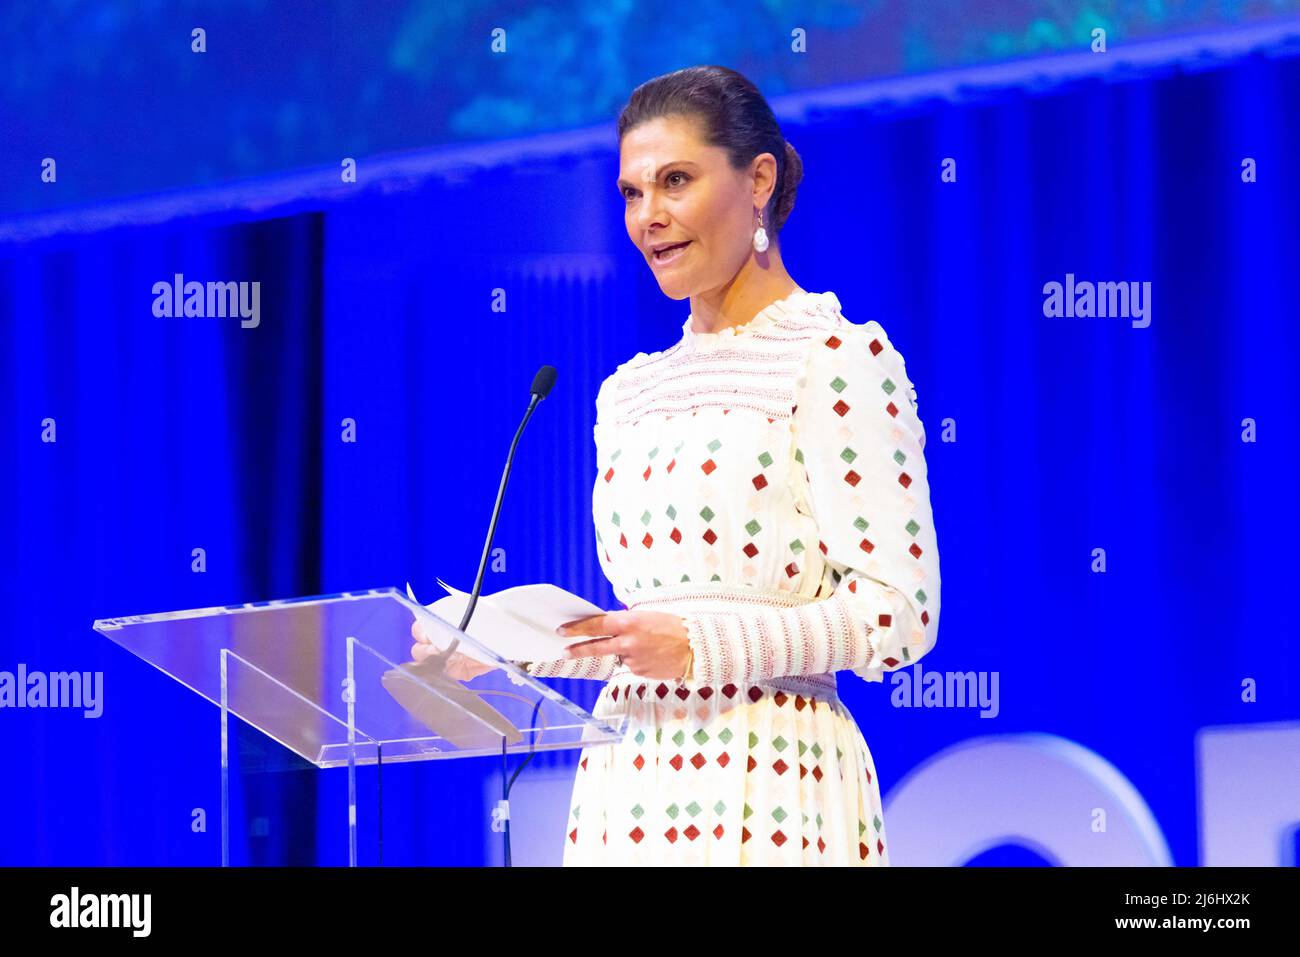 Princess Victoria at the Karolinska Institutet on the 1st day of the official 3 day visit of the Norwegian couple to Sweden. Stockholm, Sweden on April 2, 2022. Photo by Charlotte Brunzell/Stella Pictures/ABACAPRESS.COM Stock Photo